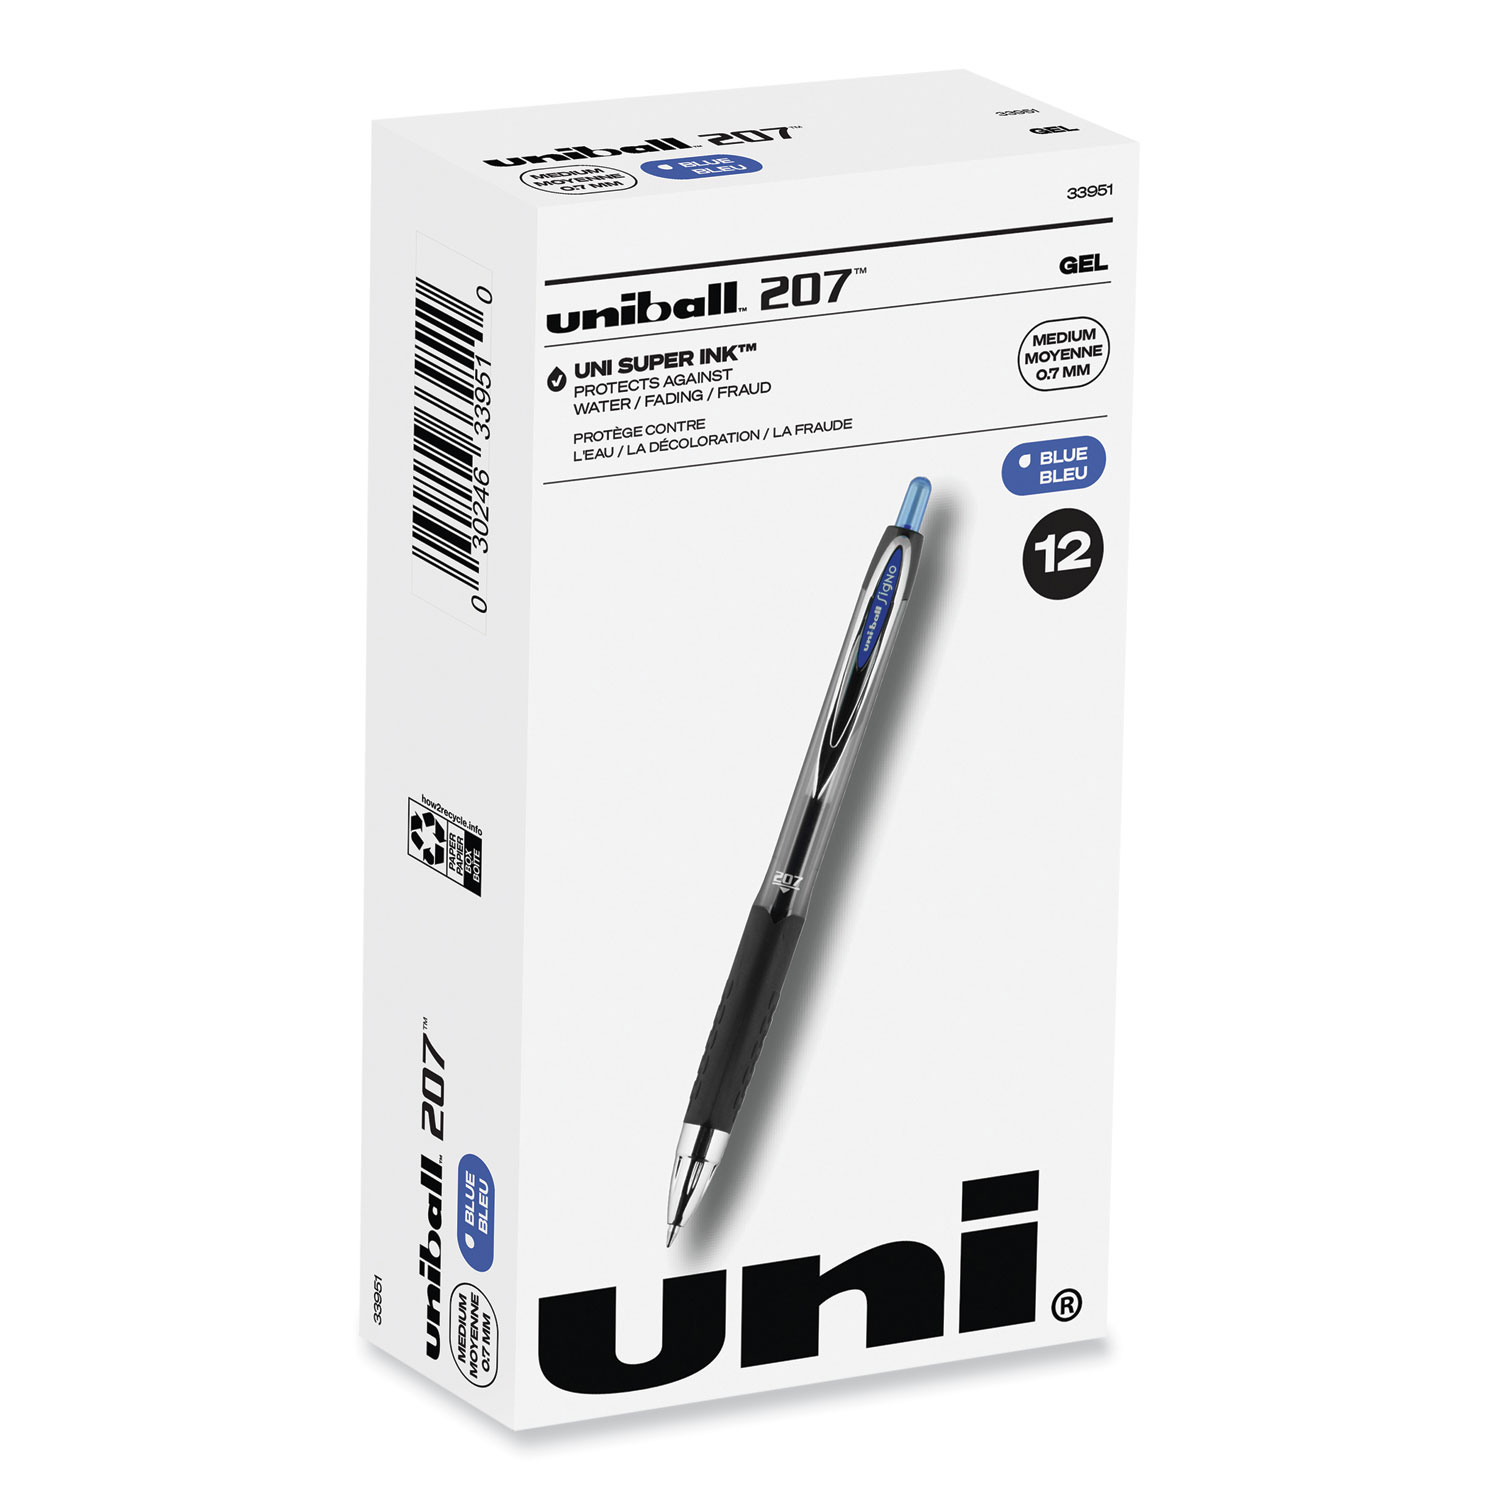 Uni-ball Vision Needle - Fine Pen Review — The Clicky Post